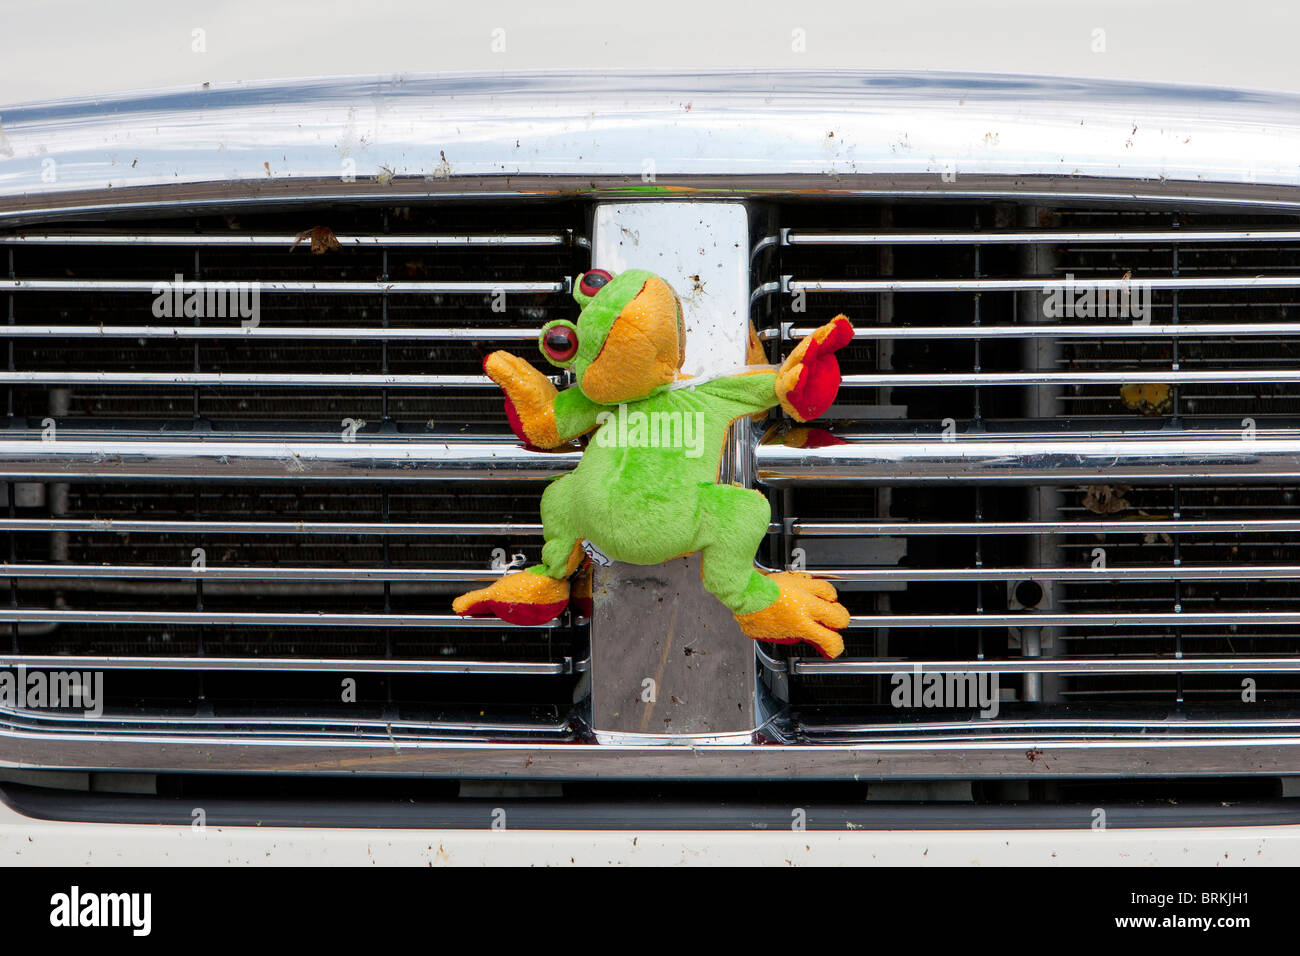 A green stuffed animal mounted to the grill of a storm chaser's car in North Platte, Nebraska, May 23, 2010. Stock Photo